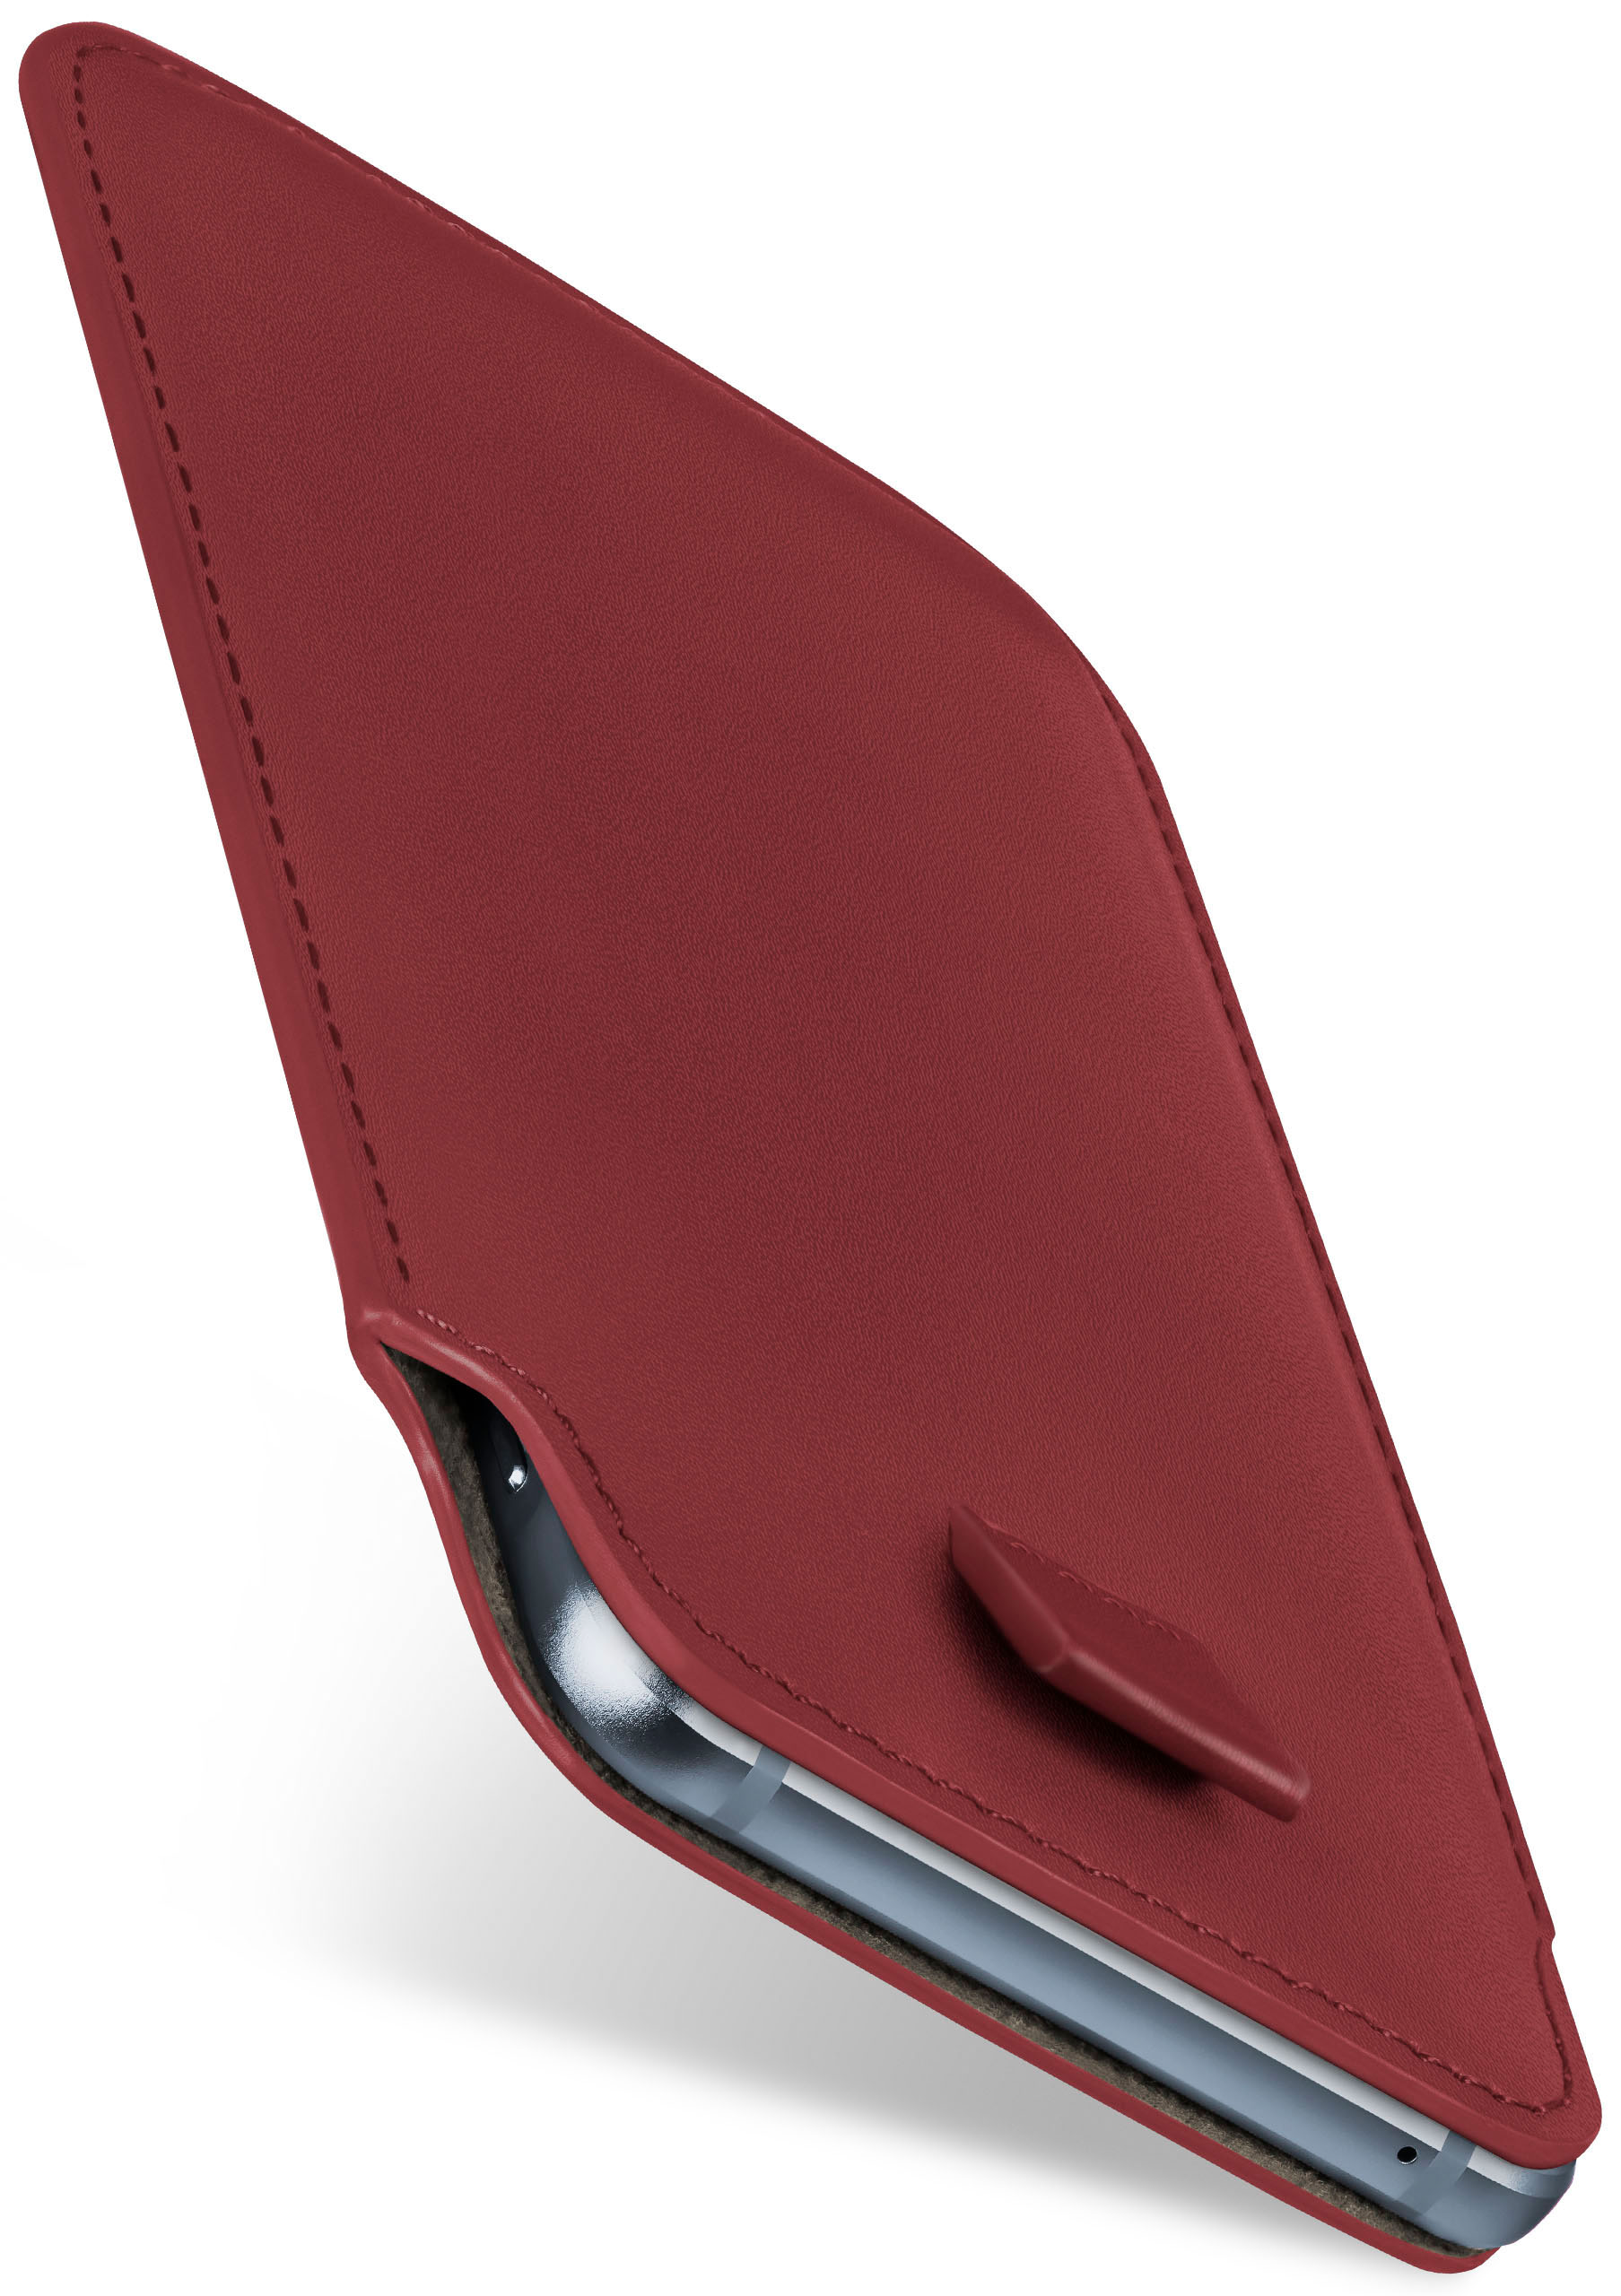 3T, Slide MOEX Case, Full Cover, Maroon-Red OnePlus,